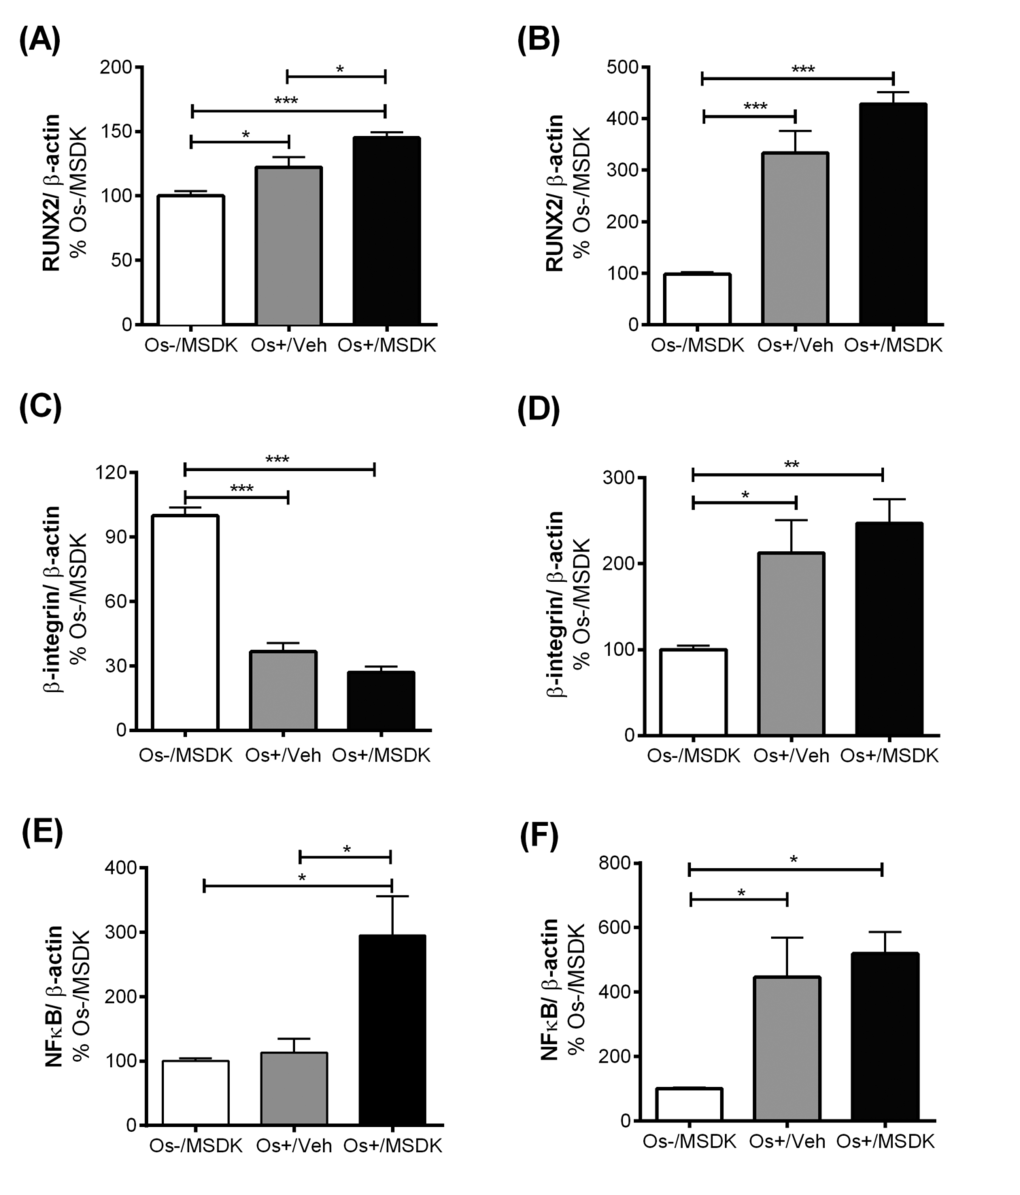 Effect of MSDK on RUNX2, β1 integrin, NFκB and metabolic proteins. After 21 days of MSDK treatment, western blot was performed to determine (A) RUNX2 expression of osteoblasts grown in transwell co-cultures, (B) RUNX2 expression of osteoblasts grown in layered co-culture, (C) β1 integrin expression of osteoblasts grown in transwell co-cultures, (D) β1 integrin expression of osteoblasts and osteoclasts grown in layered co-cultures (E) NFκB expression of osteoclasts grown in transwell co-cultures, and (F) NFκB expression of osteoblasts and osteoclasts grown in layered co-cultures. 